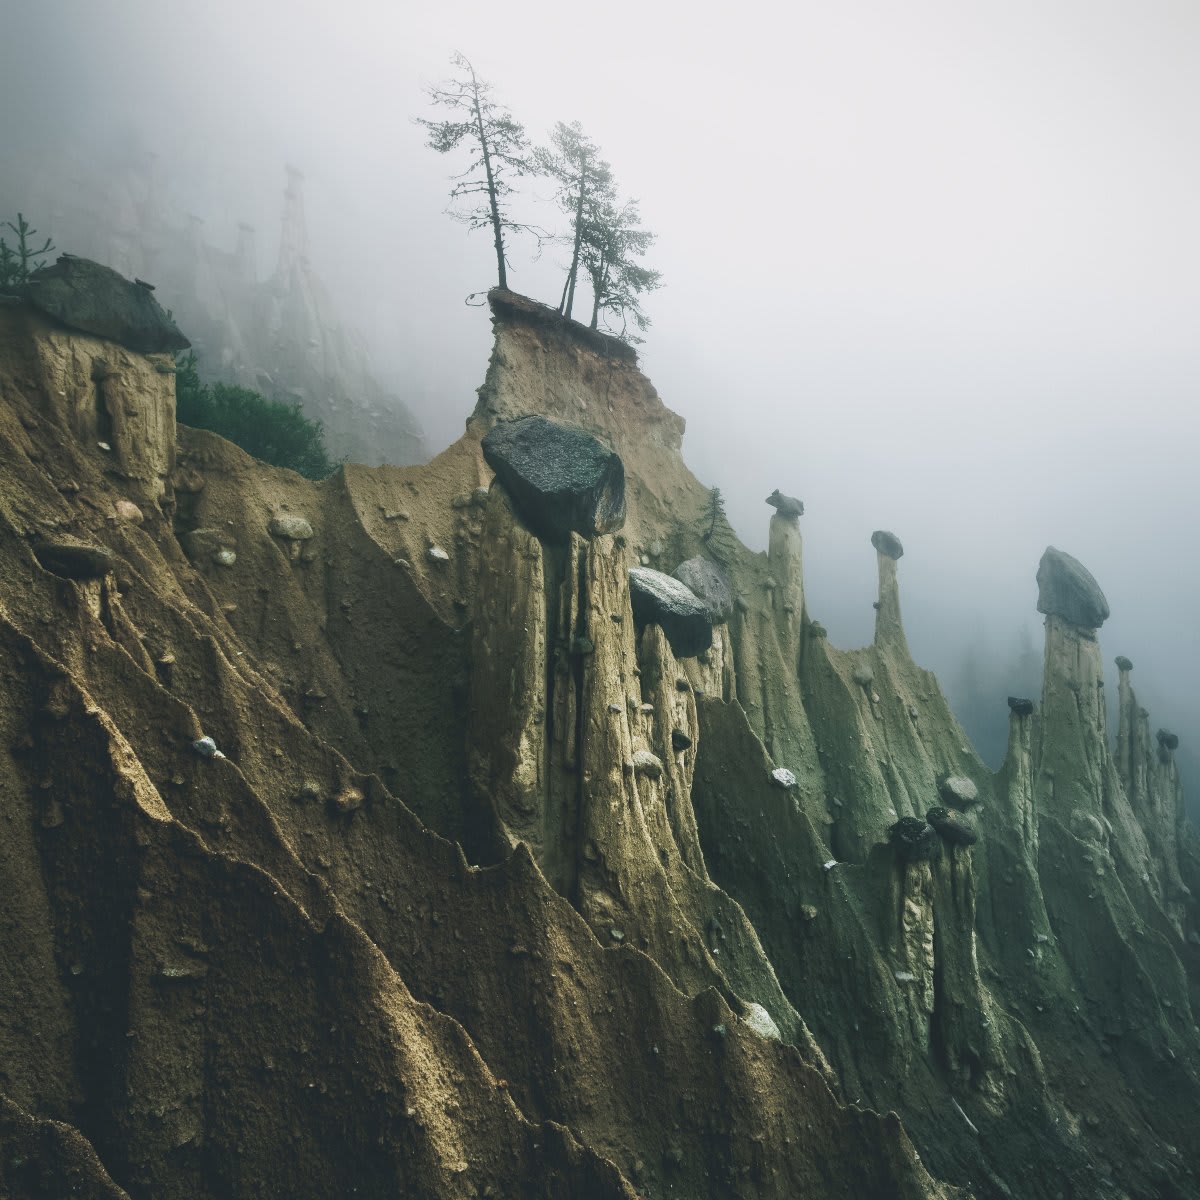 Otherworldly ‘Earth Pyramids’ Captured in the Foggy Early Morning Light by Photographer Kilian Schönberger